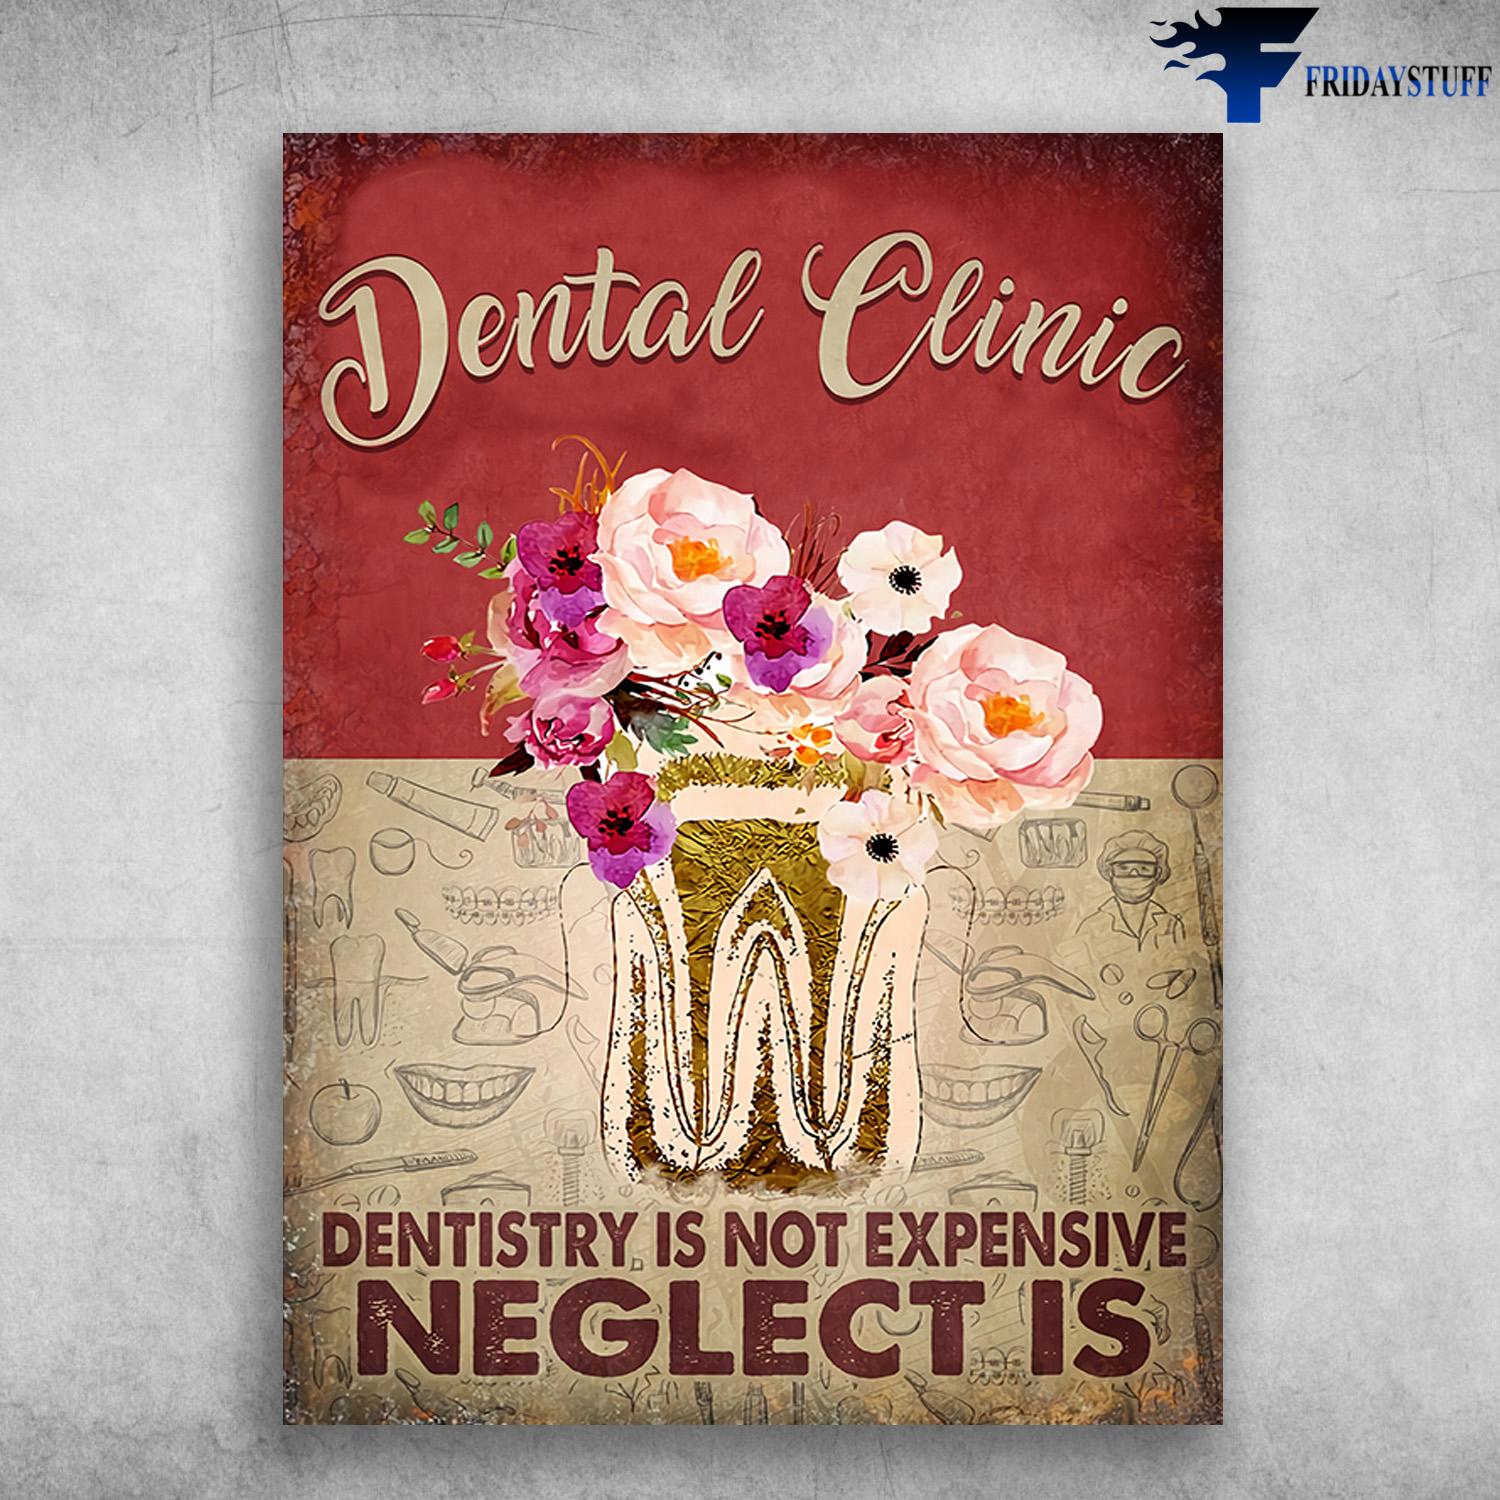 Dentist Poster, Teeth Care, Dental Clinic, Dentistry Is Not Expensive, Neglect Is